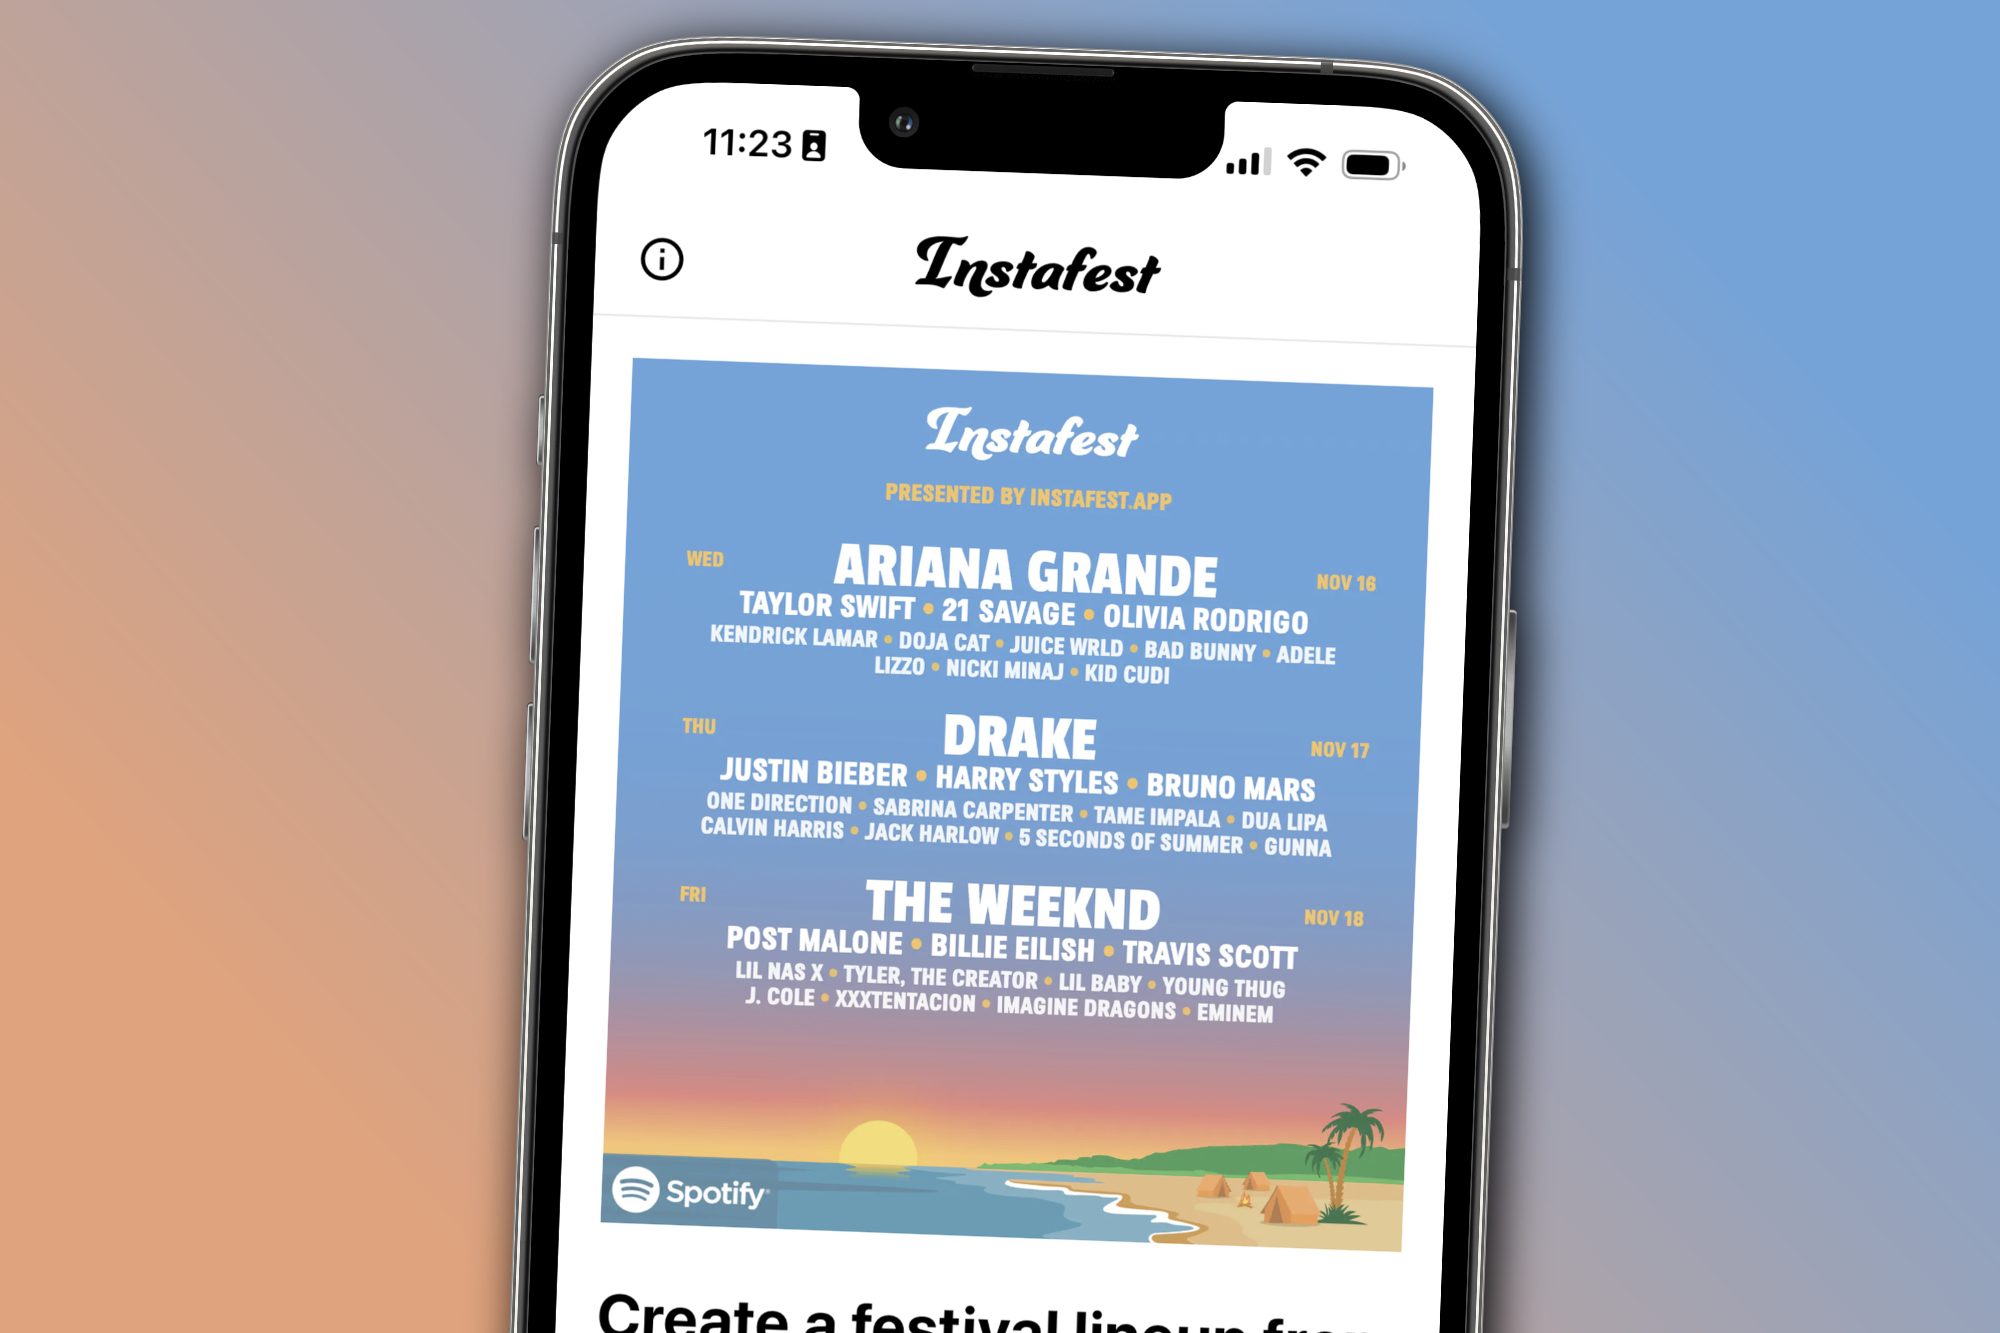 Instafest app: How to make your own Spotify festival lineup | Digital Trends